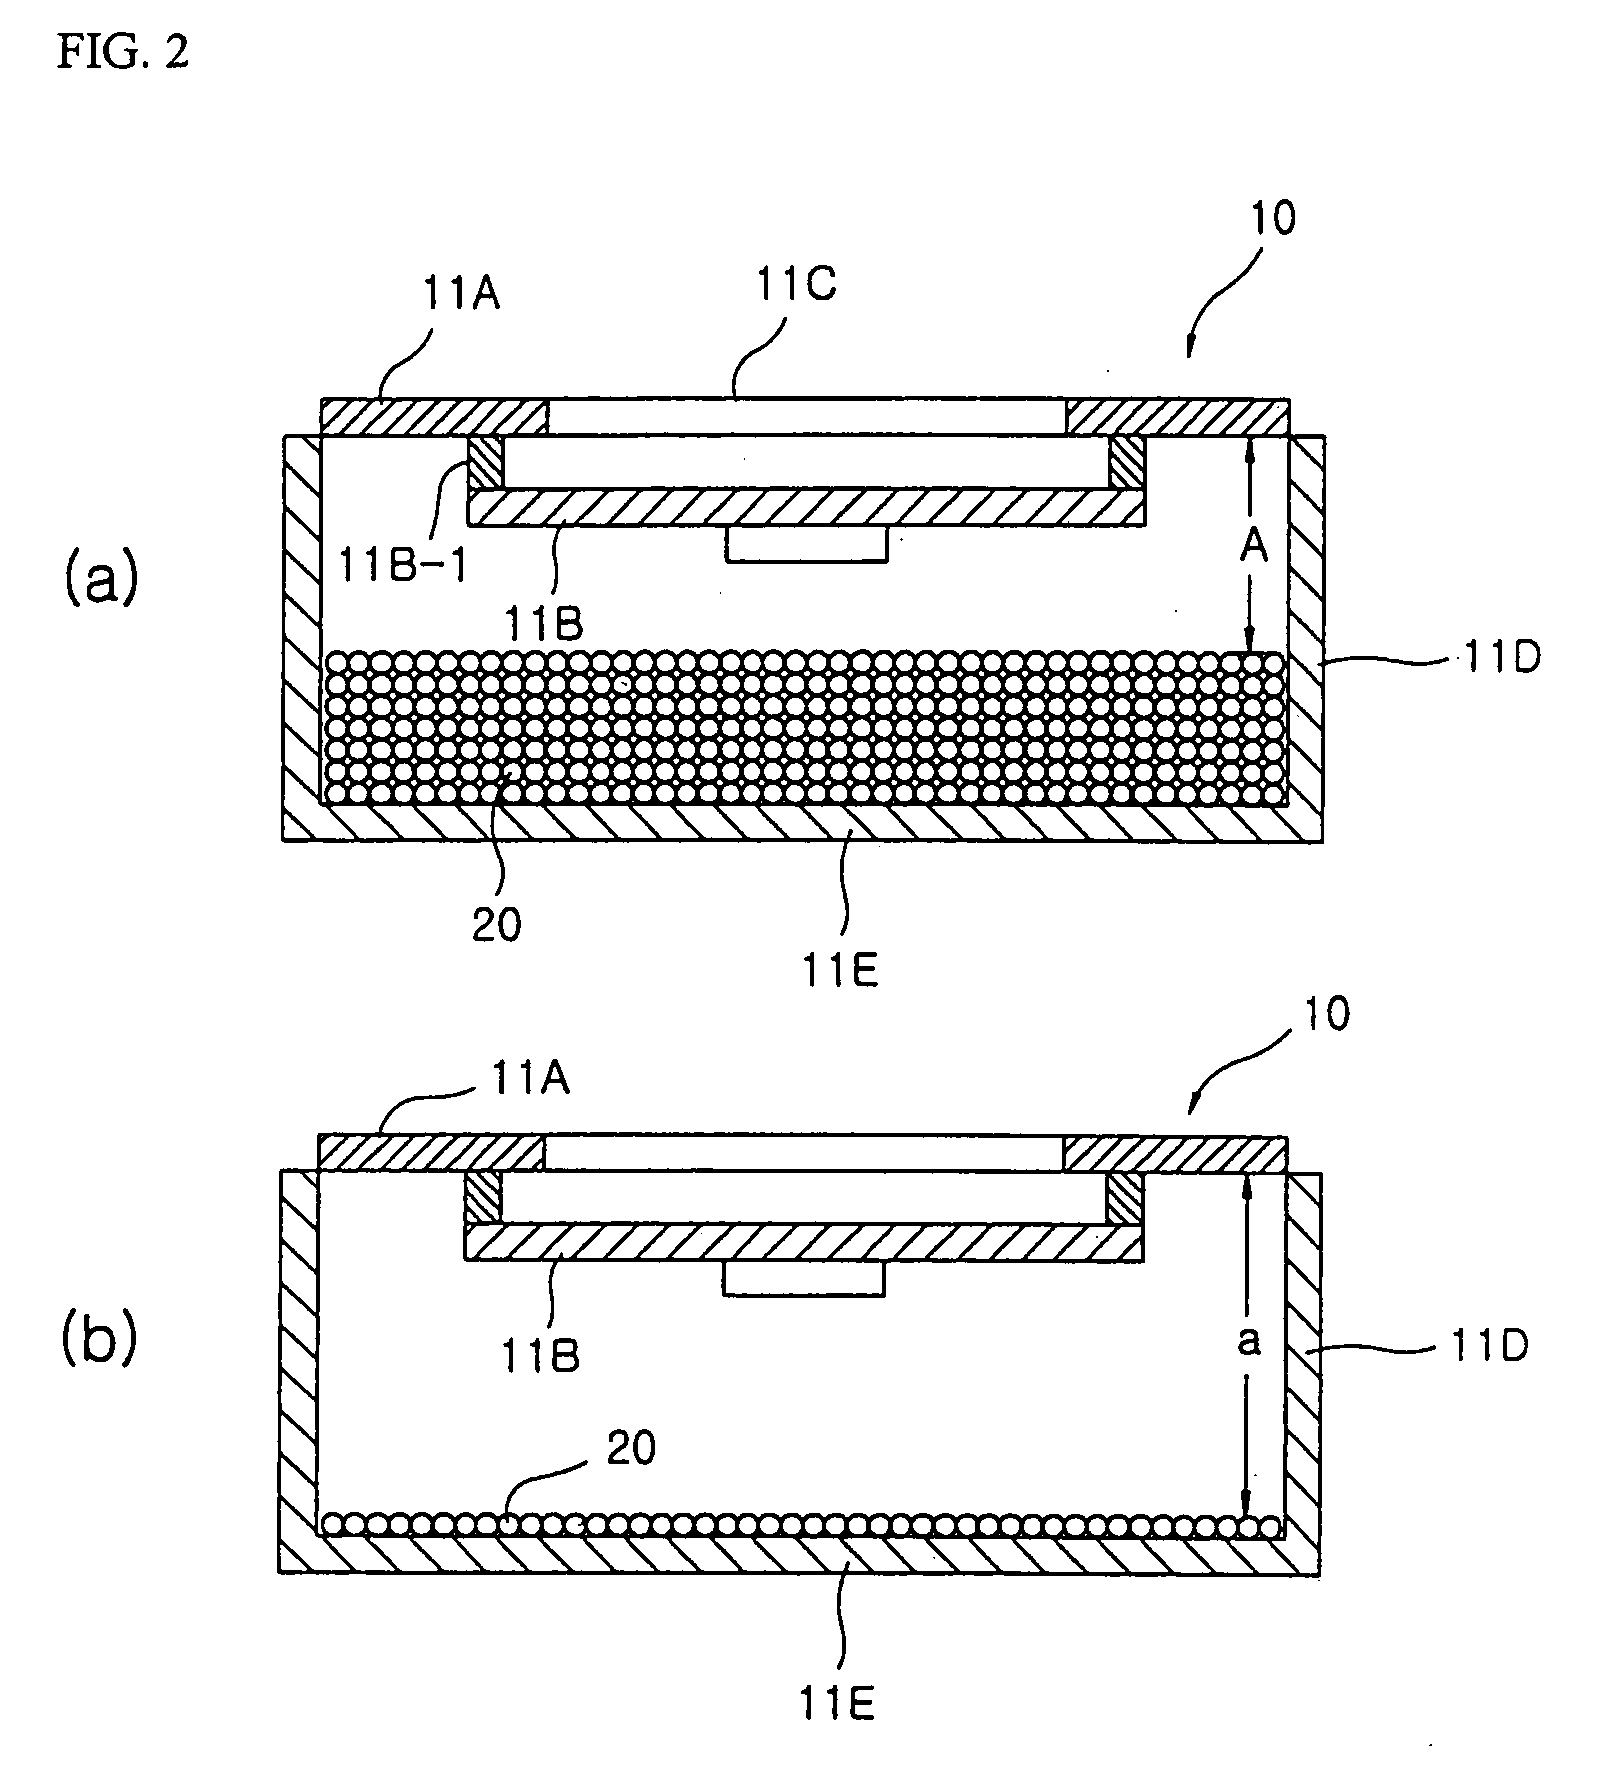 Source for thermal physical vapor deposition of organic electroluminescent layers